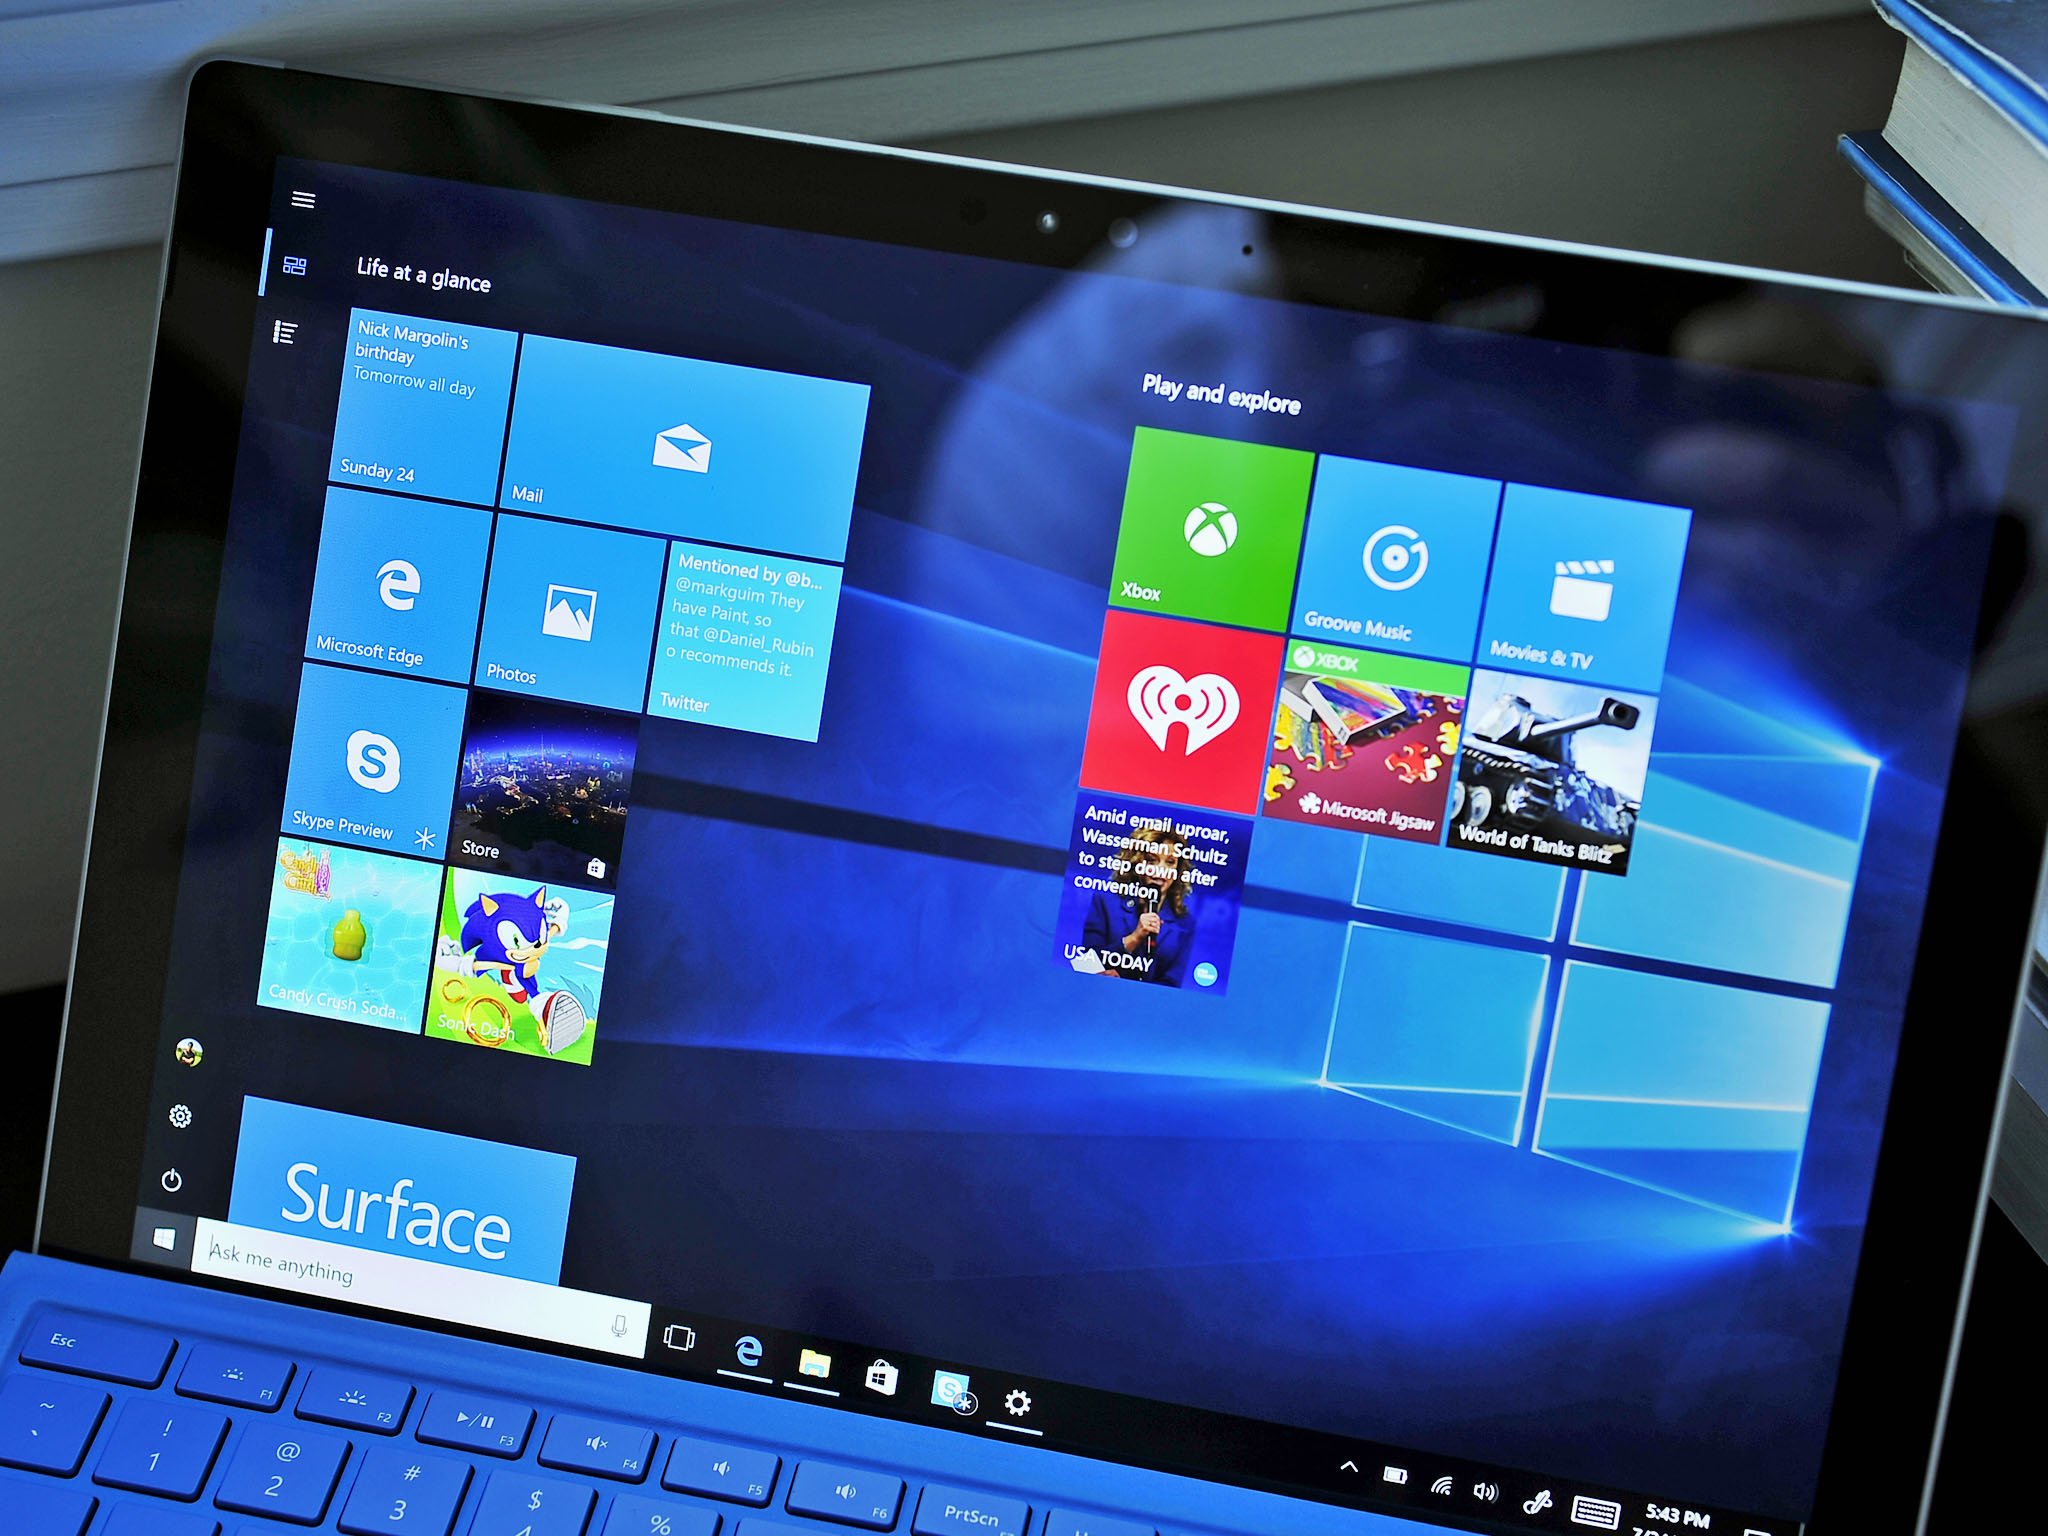 Microsoft opens up about the data it collects in Windows 10